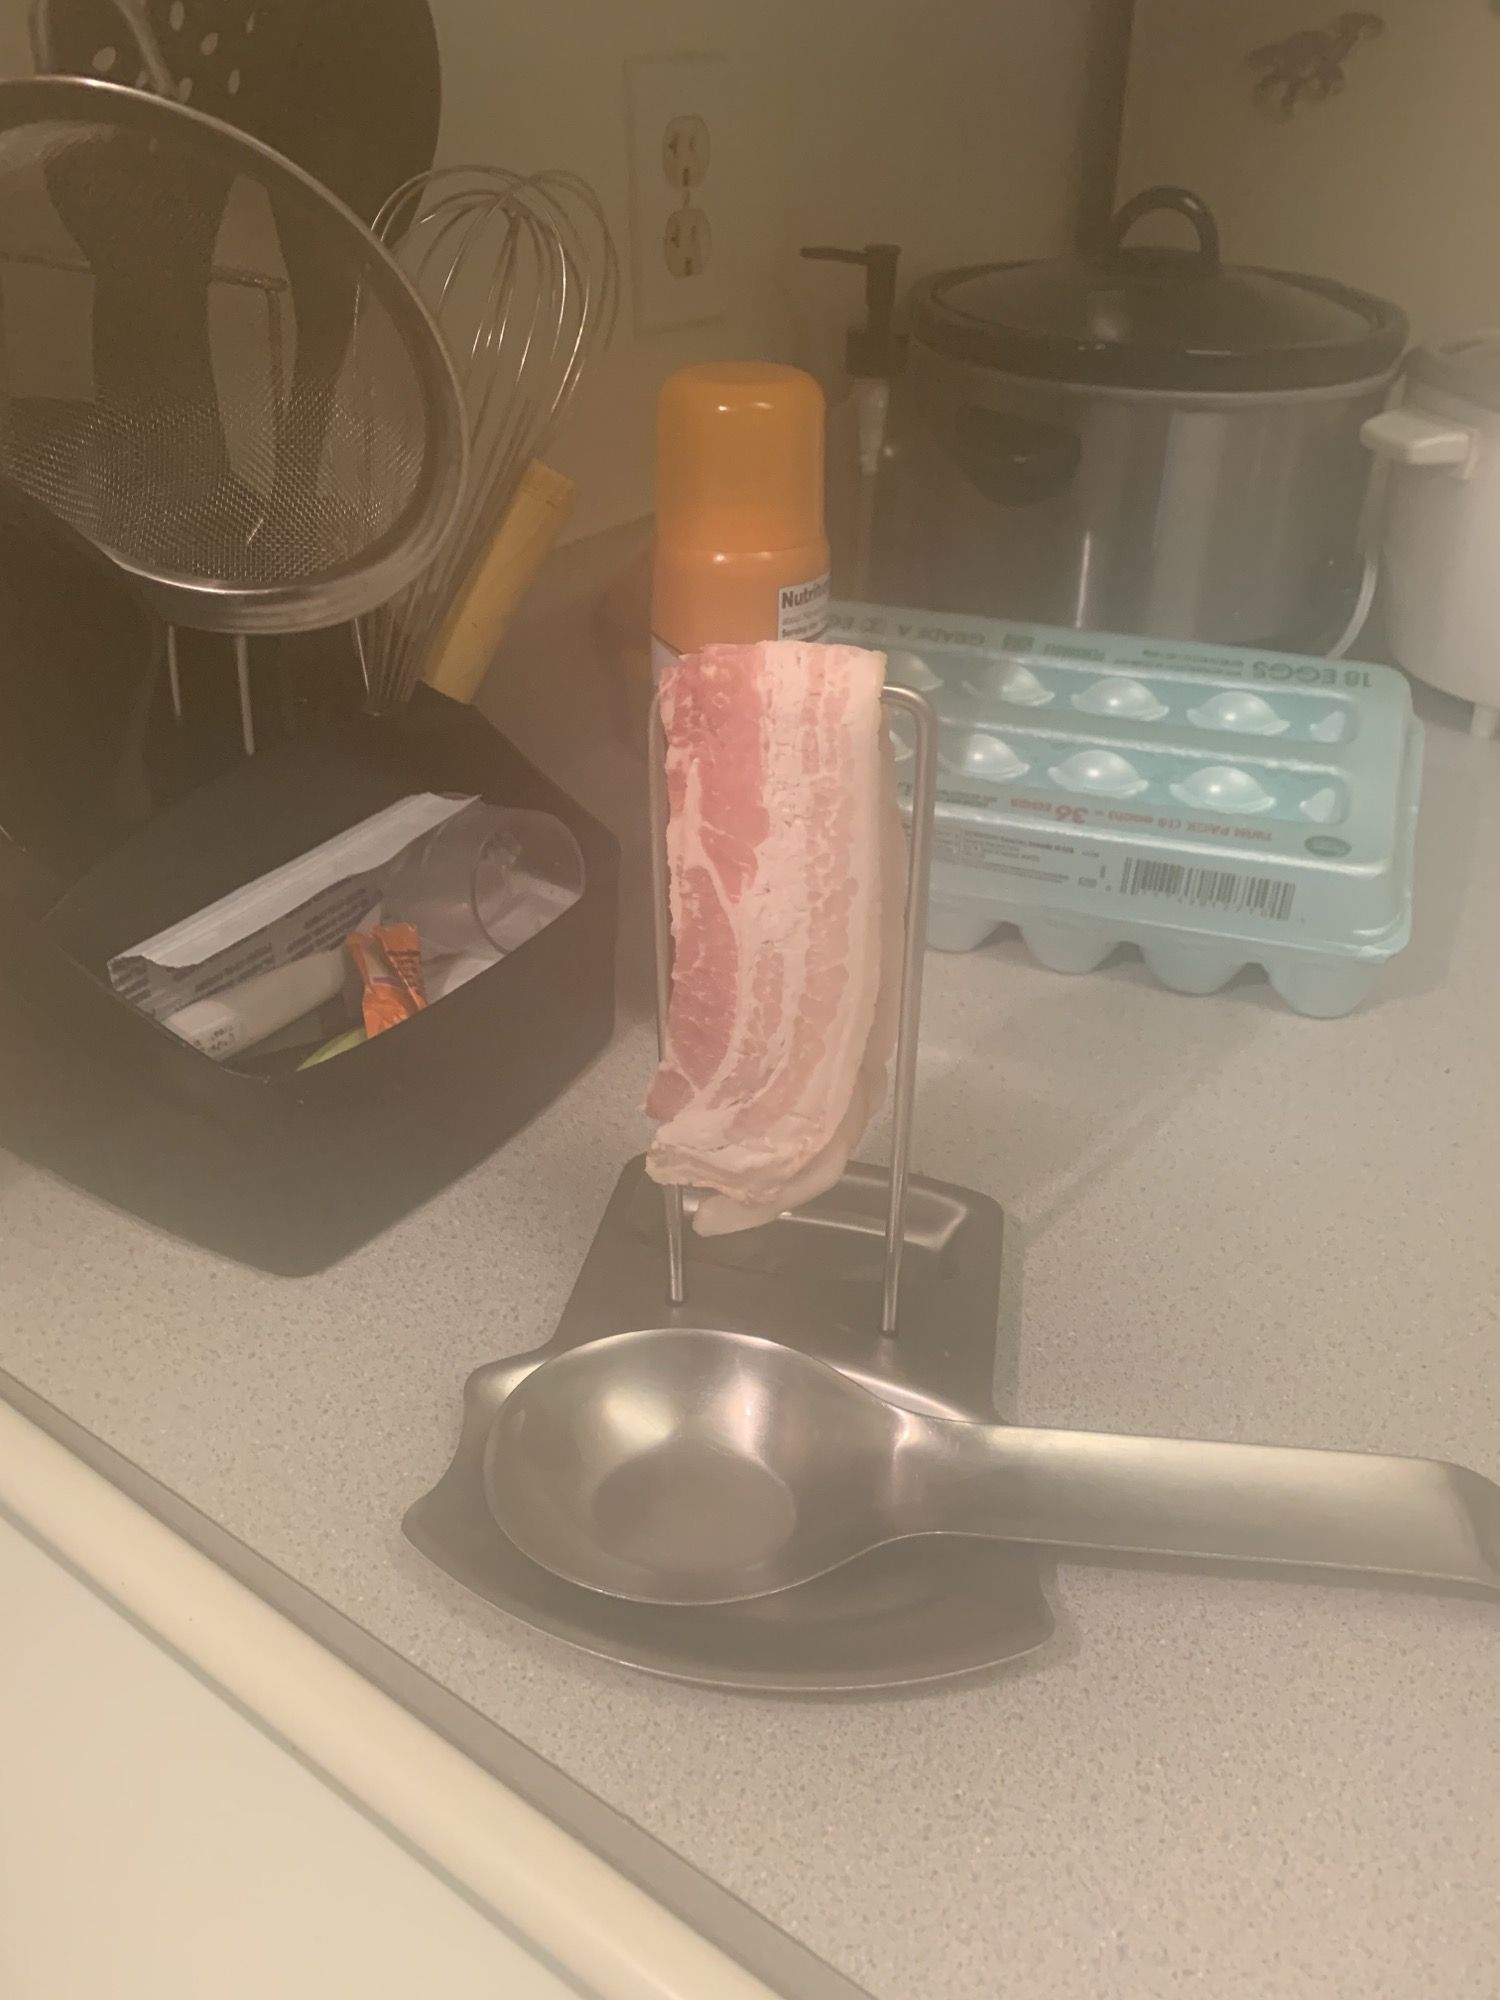 My wife way of getting the bacon ready to be cook is something I will never understand…